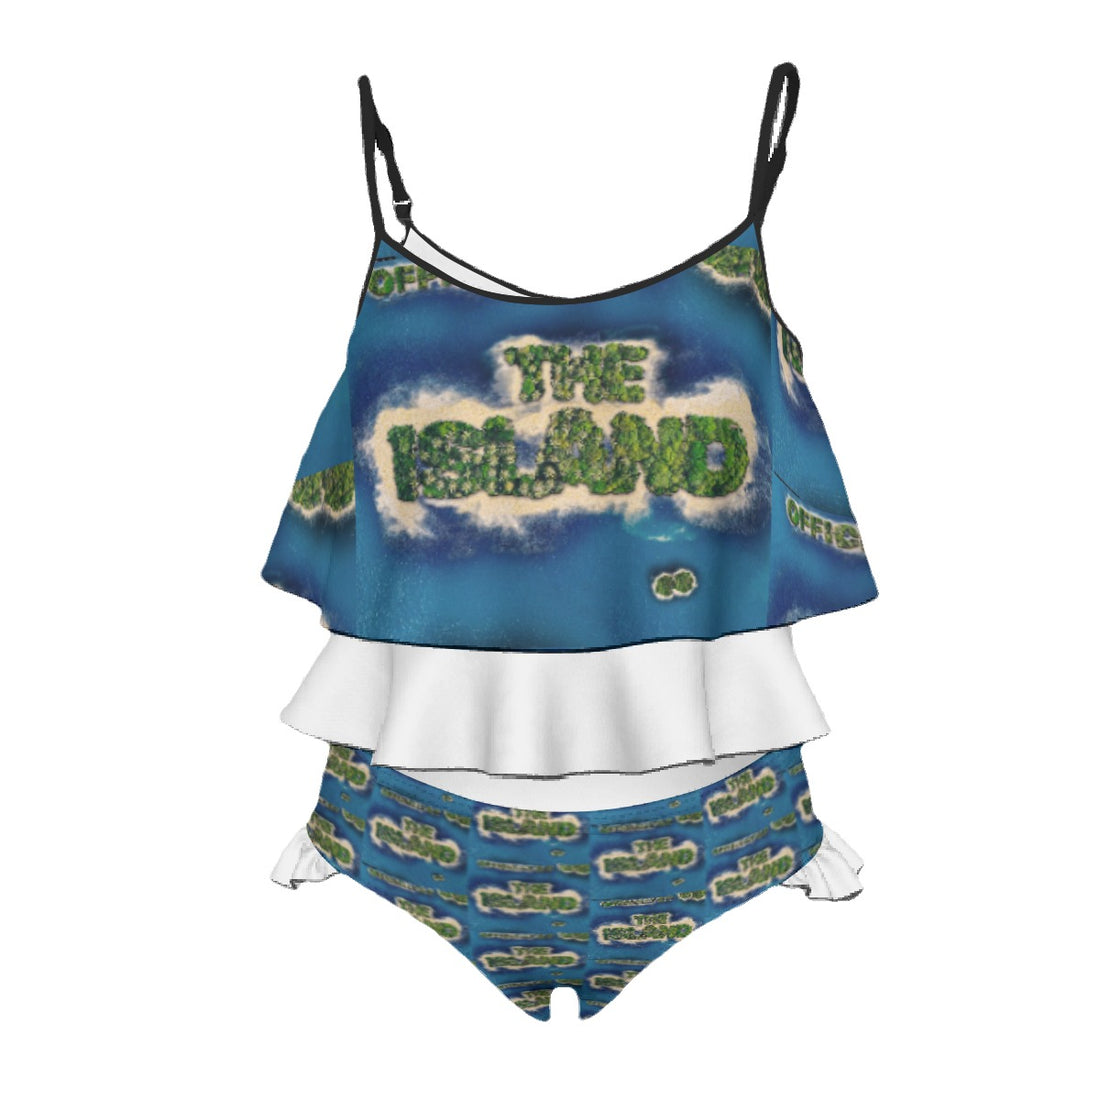 The Island kids suit